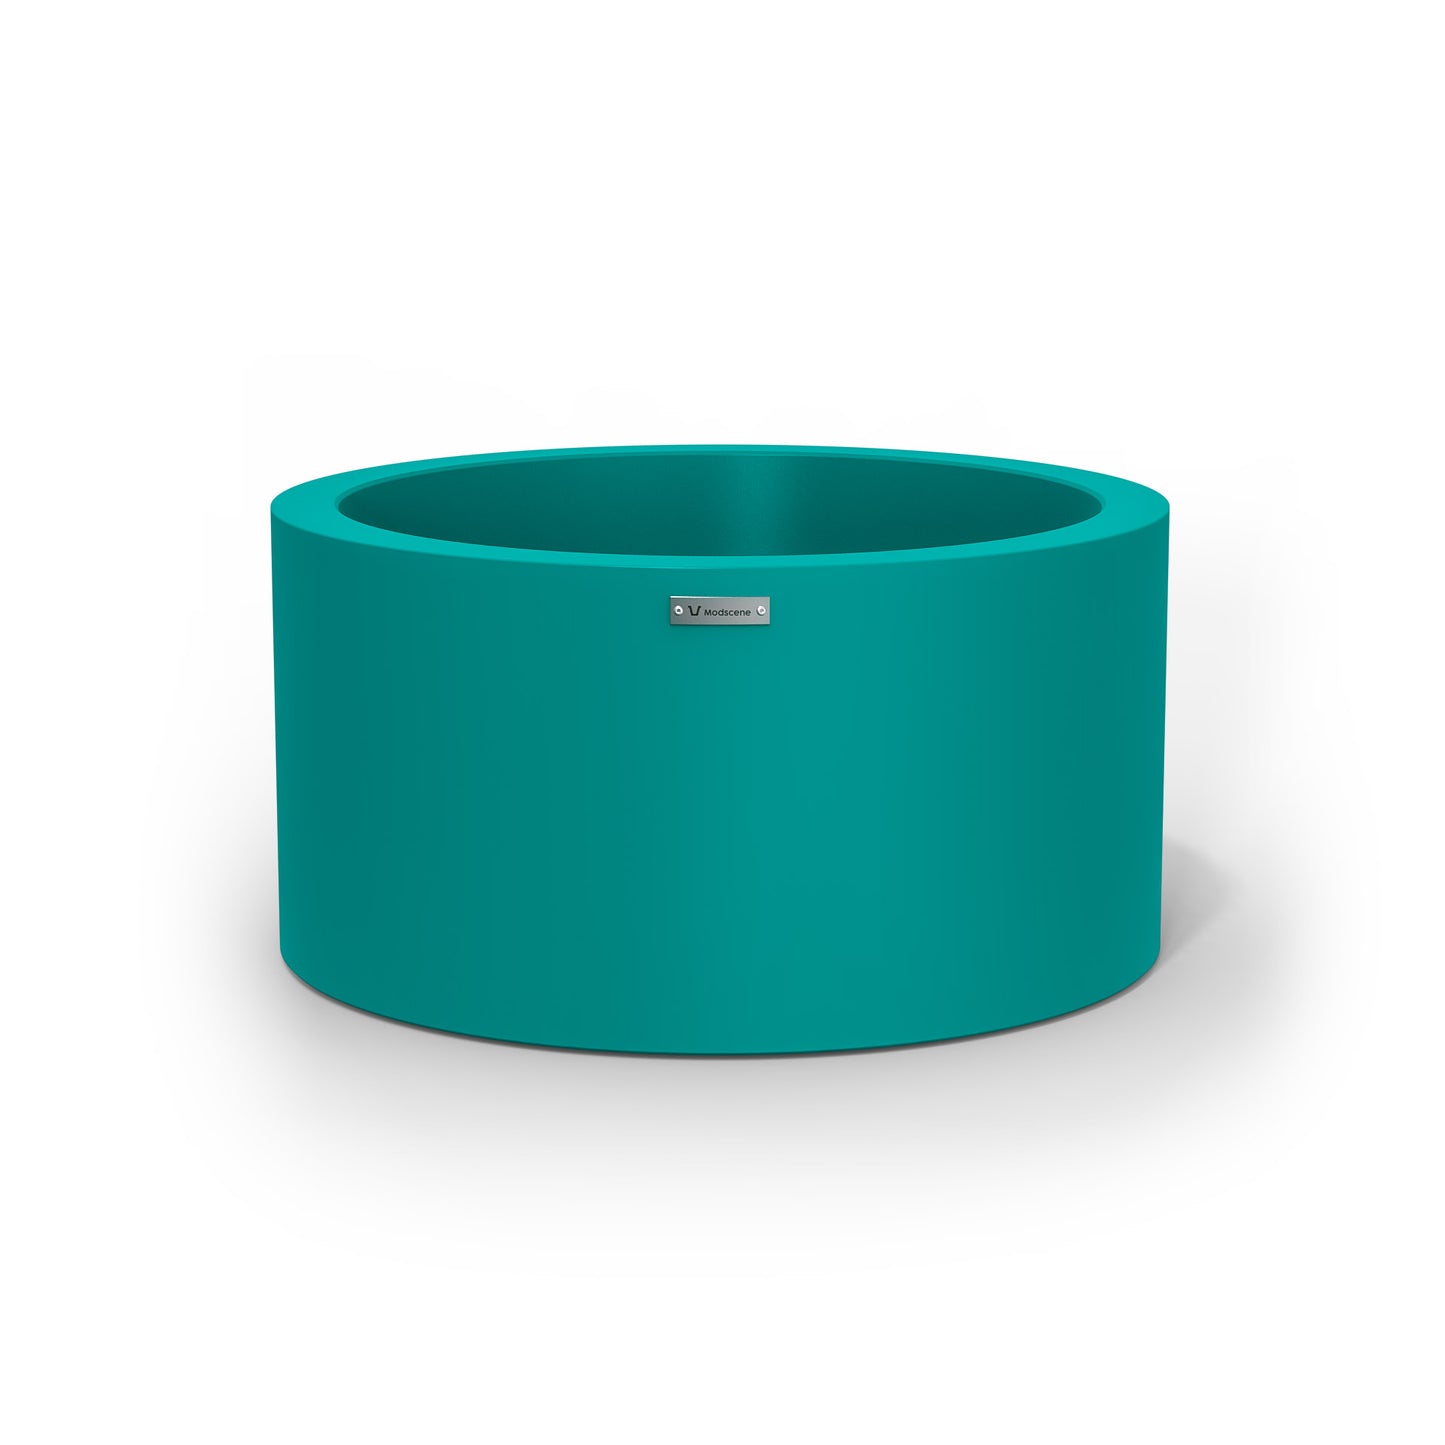 A medium sized planter pot in a teal blue colour made by Modscene.